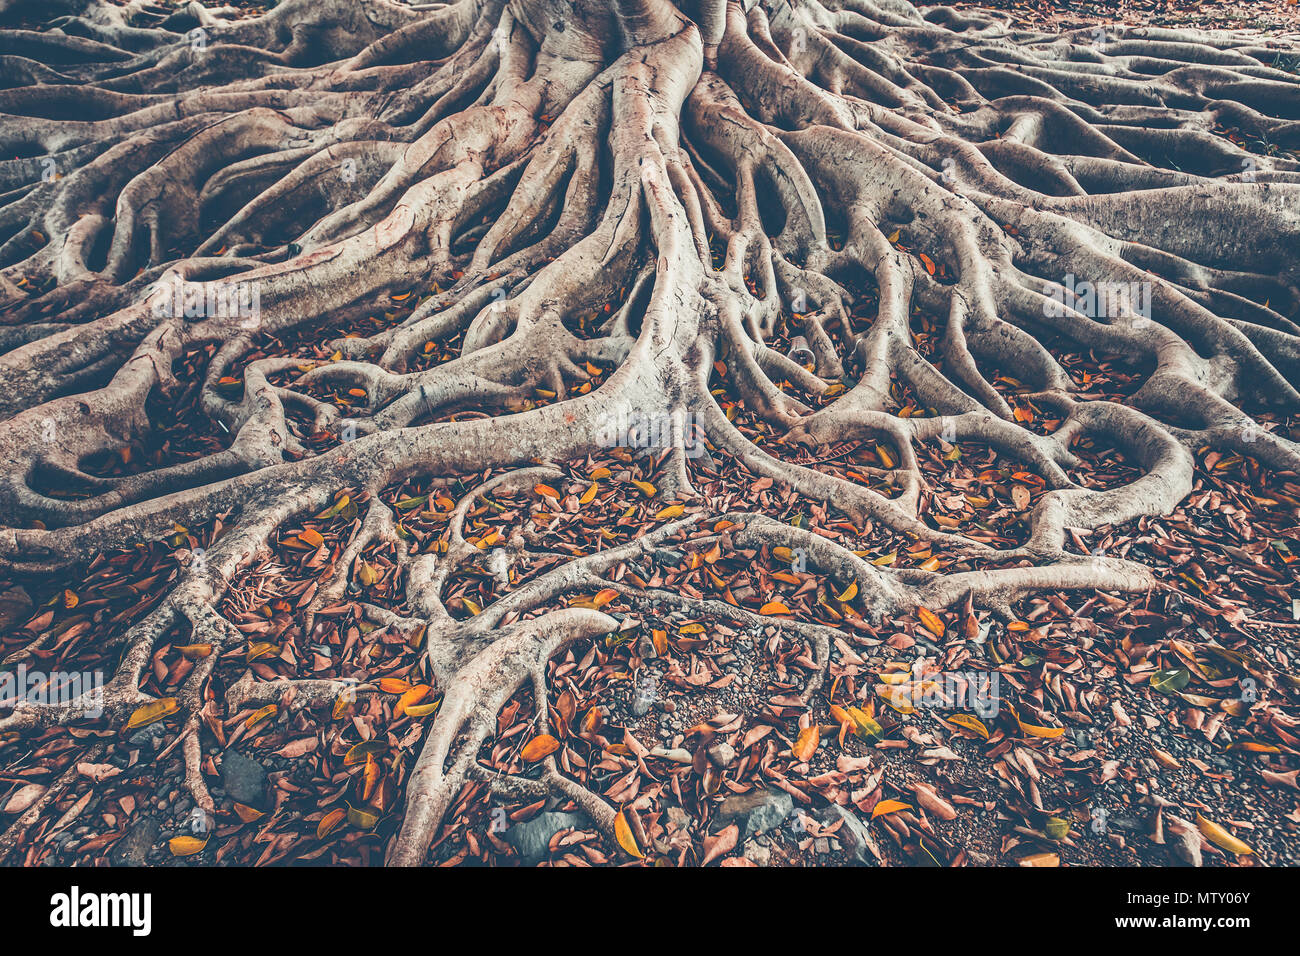 The spreading root system of the old tree on the ground. The variety of shapes in wild nature. Perfect background for the various kinds of collages, illustrations and digital media. Stock Photo